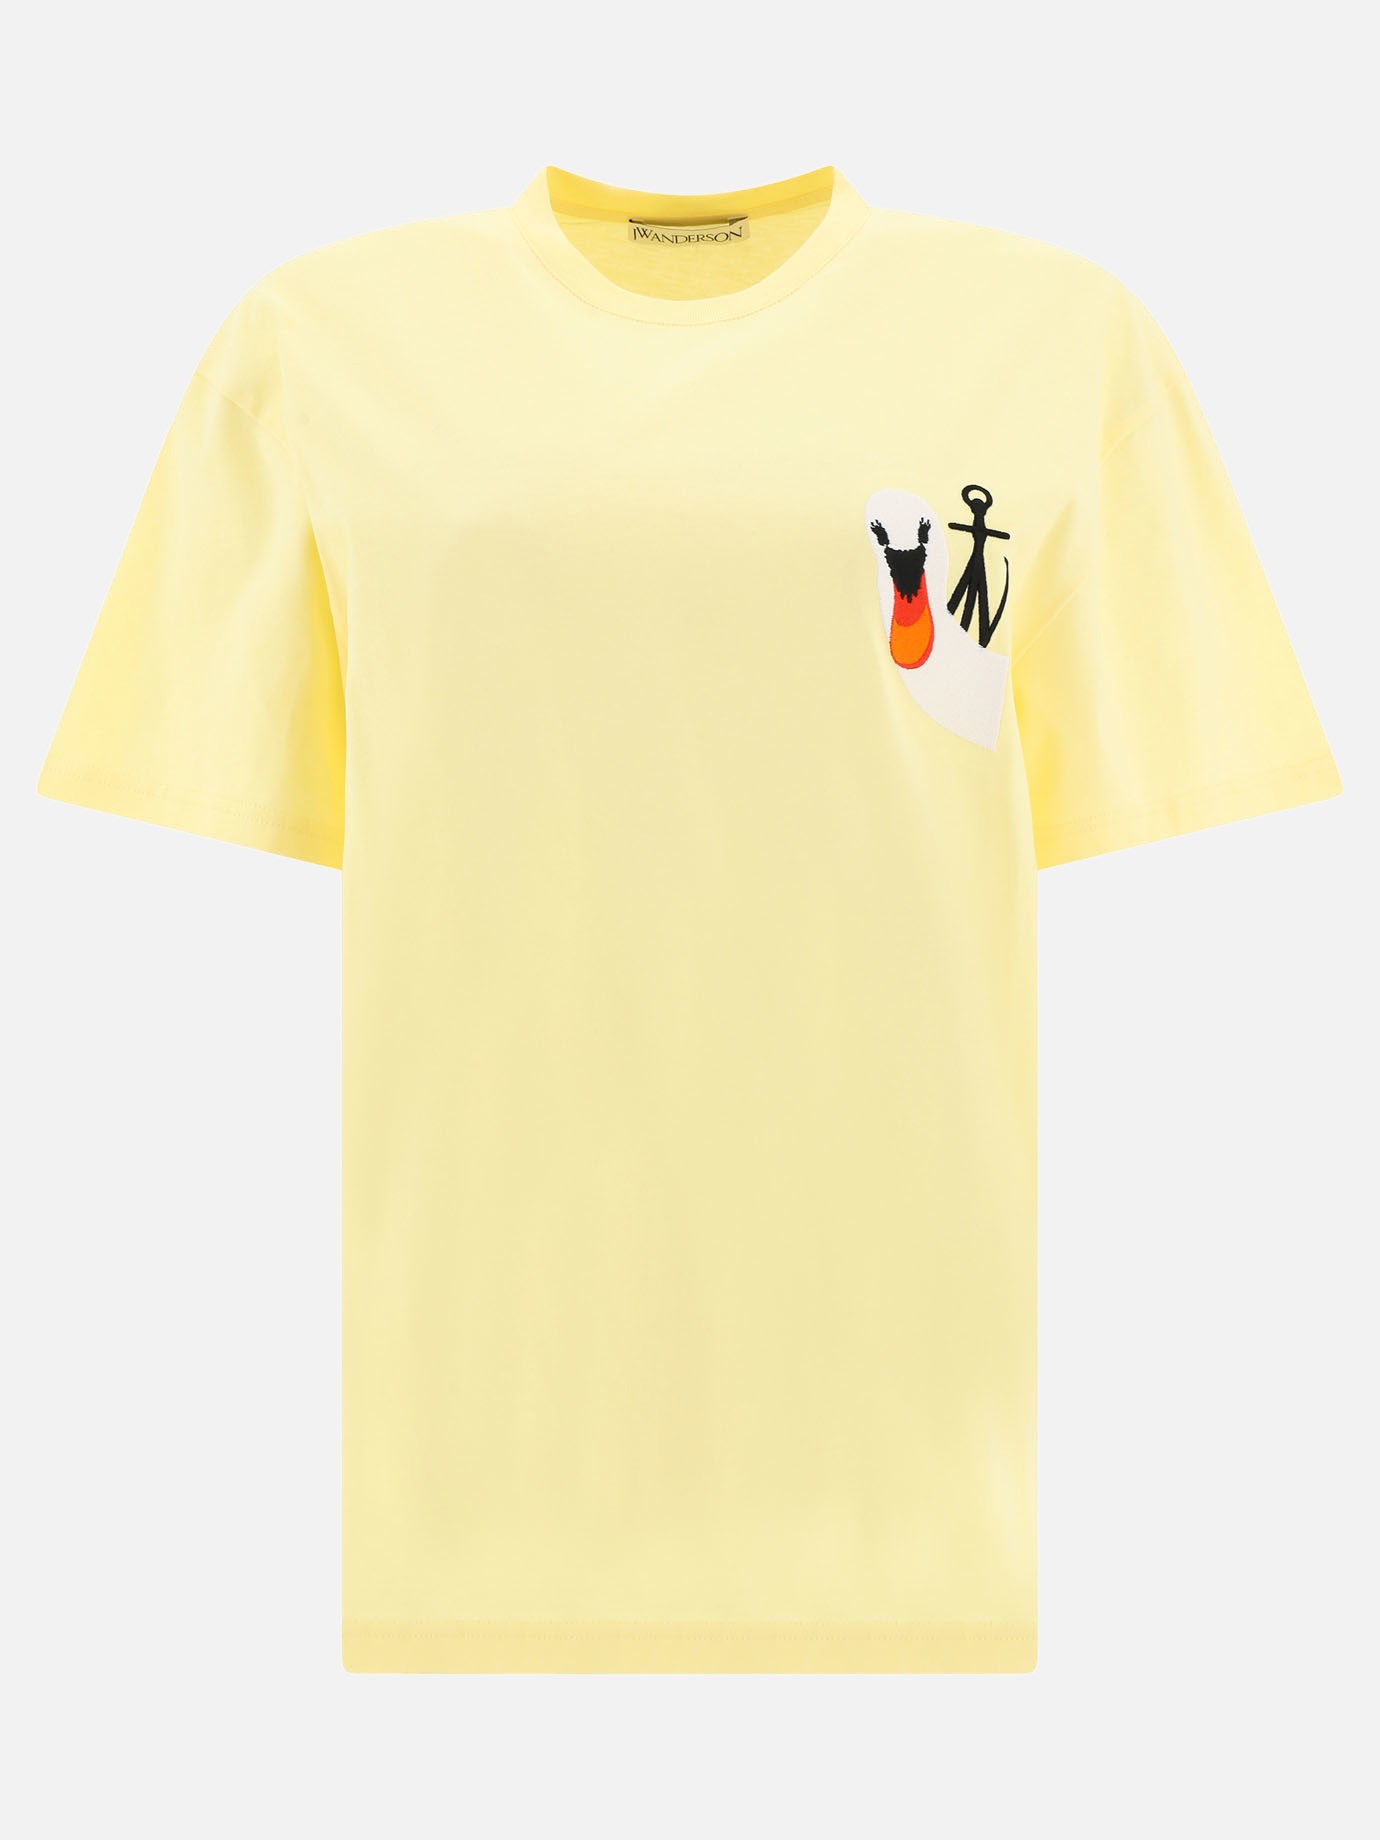  Swan  t-shirtby JW Anderson - 2